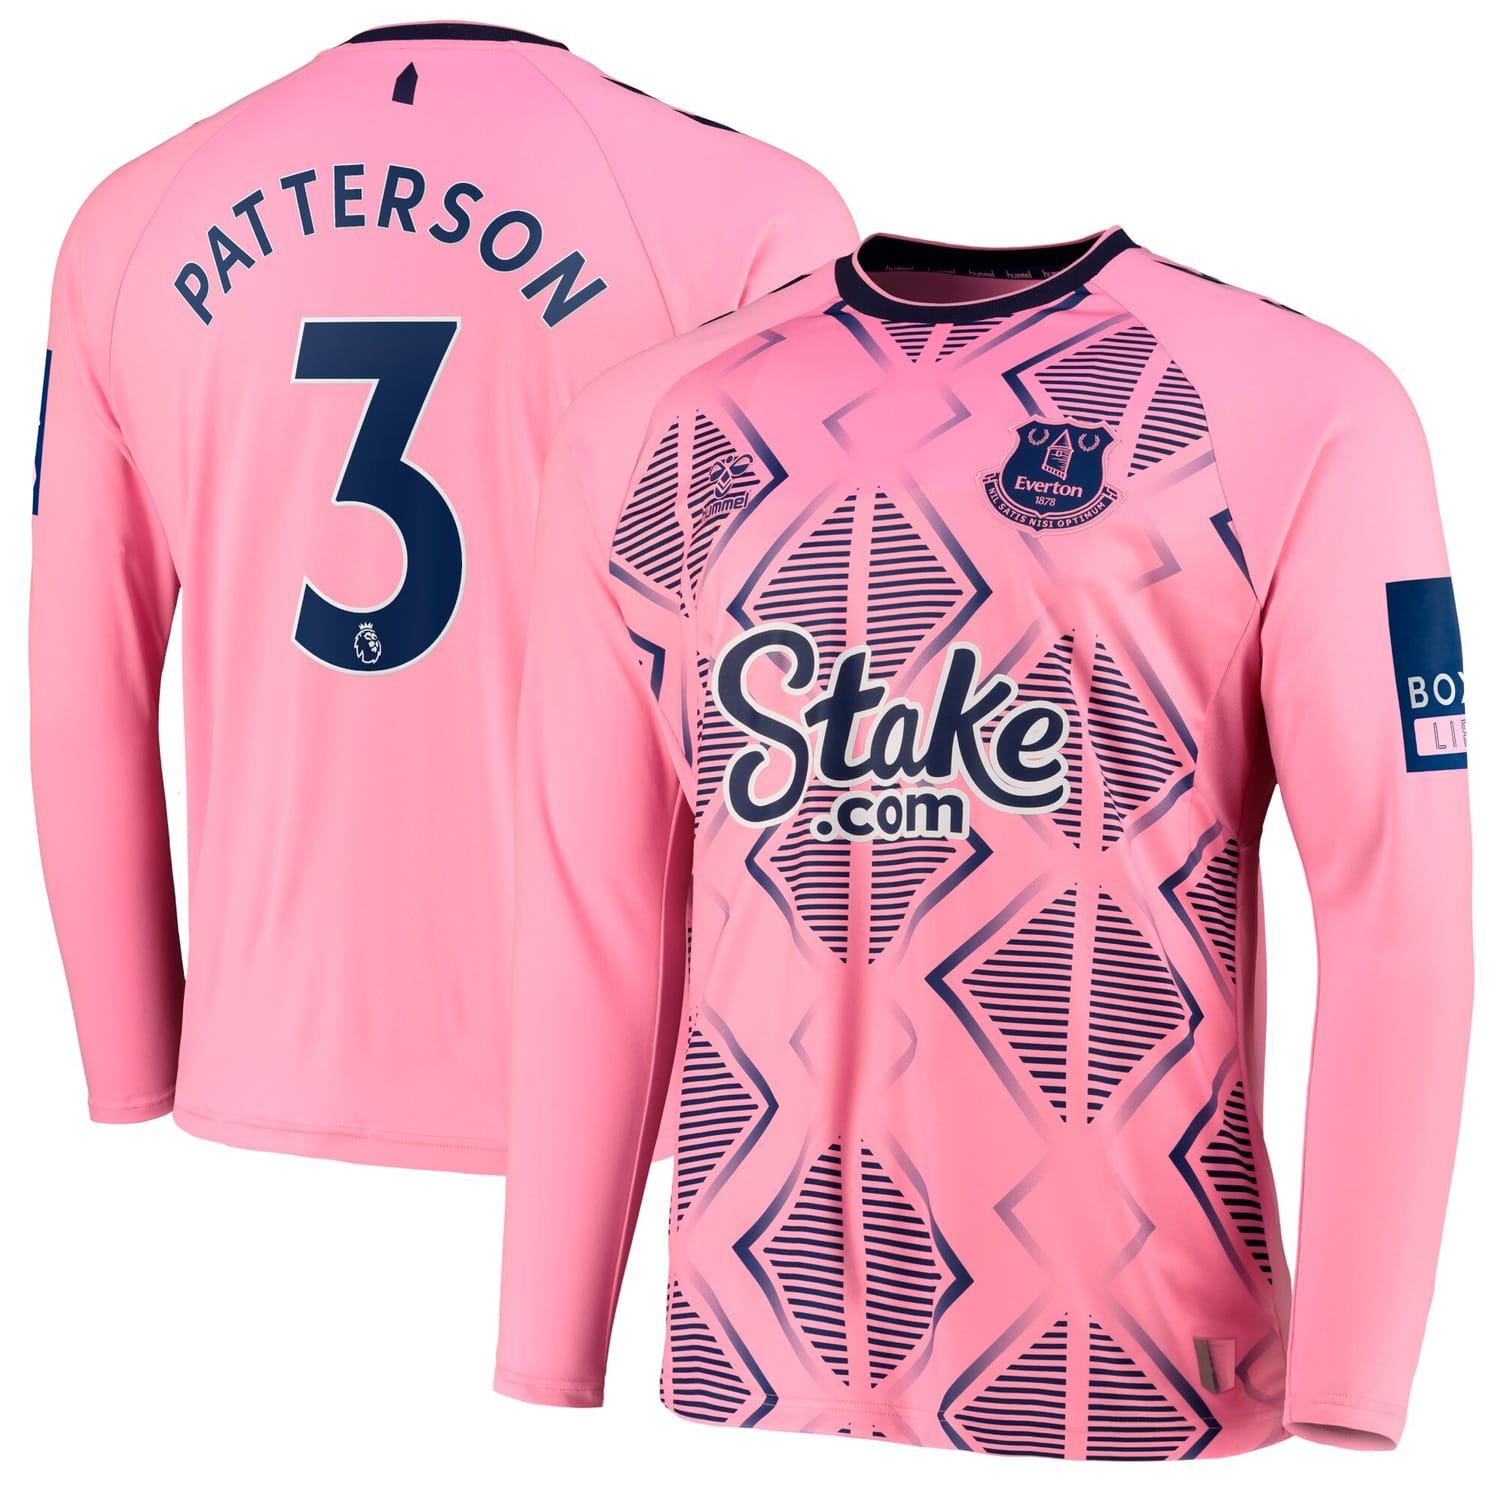 Premier League Everton Away Jersey Shirt Long Sleeve 2022-23 player Nathan Patterson 3 printing for Men